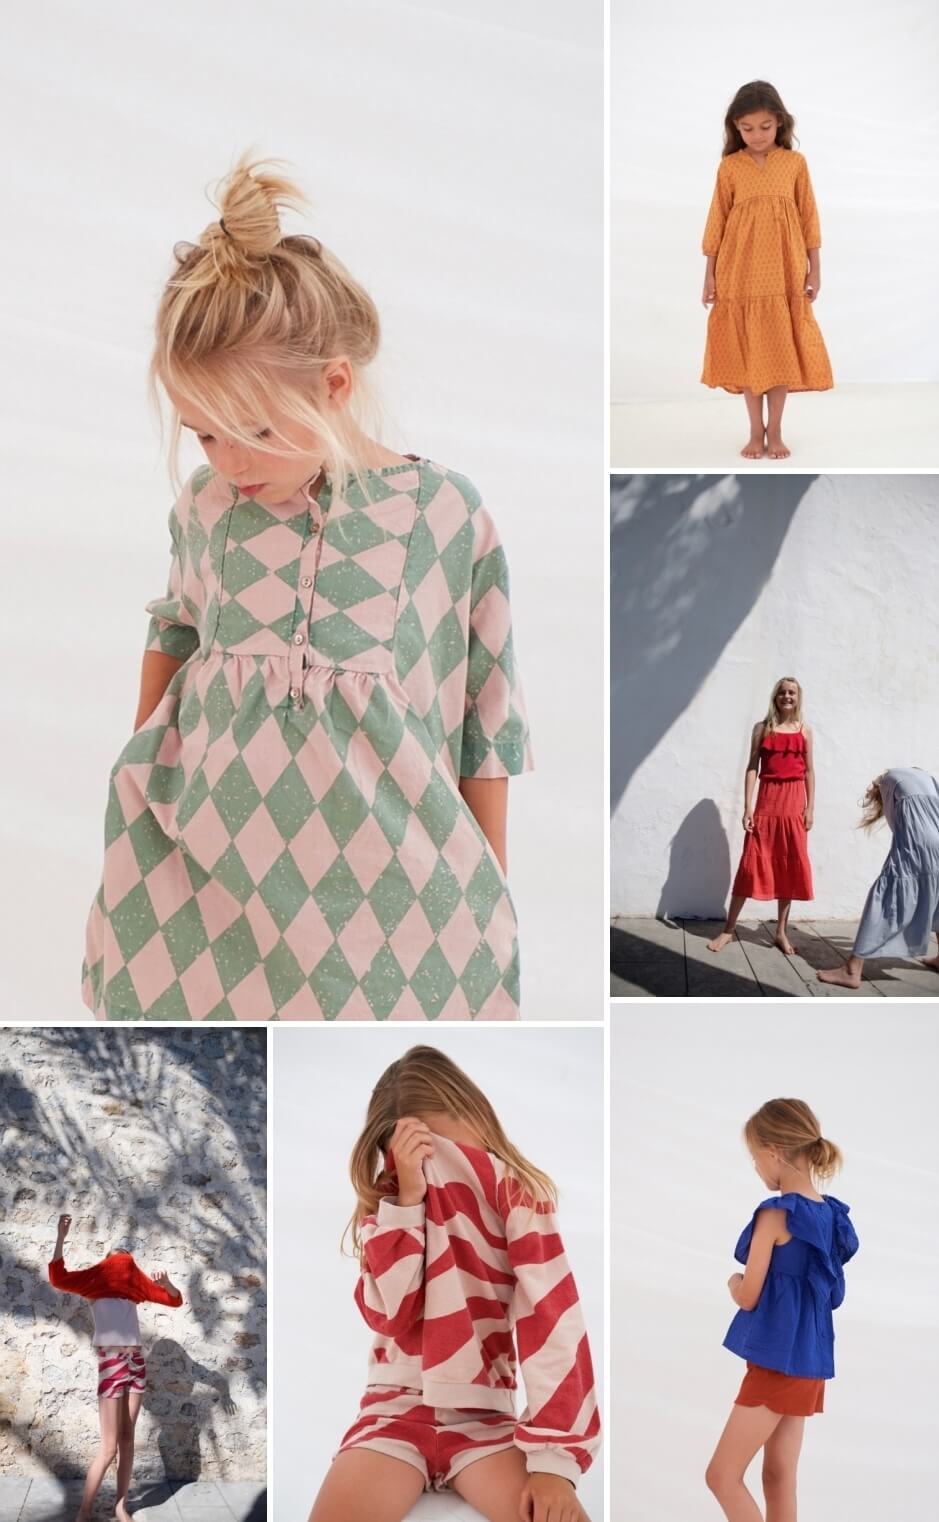 Thoughtfully and responsible-produced children's fashion longlivethequeen